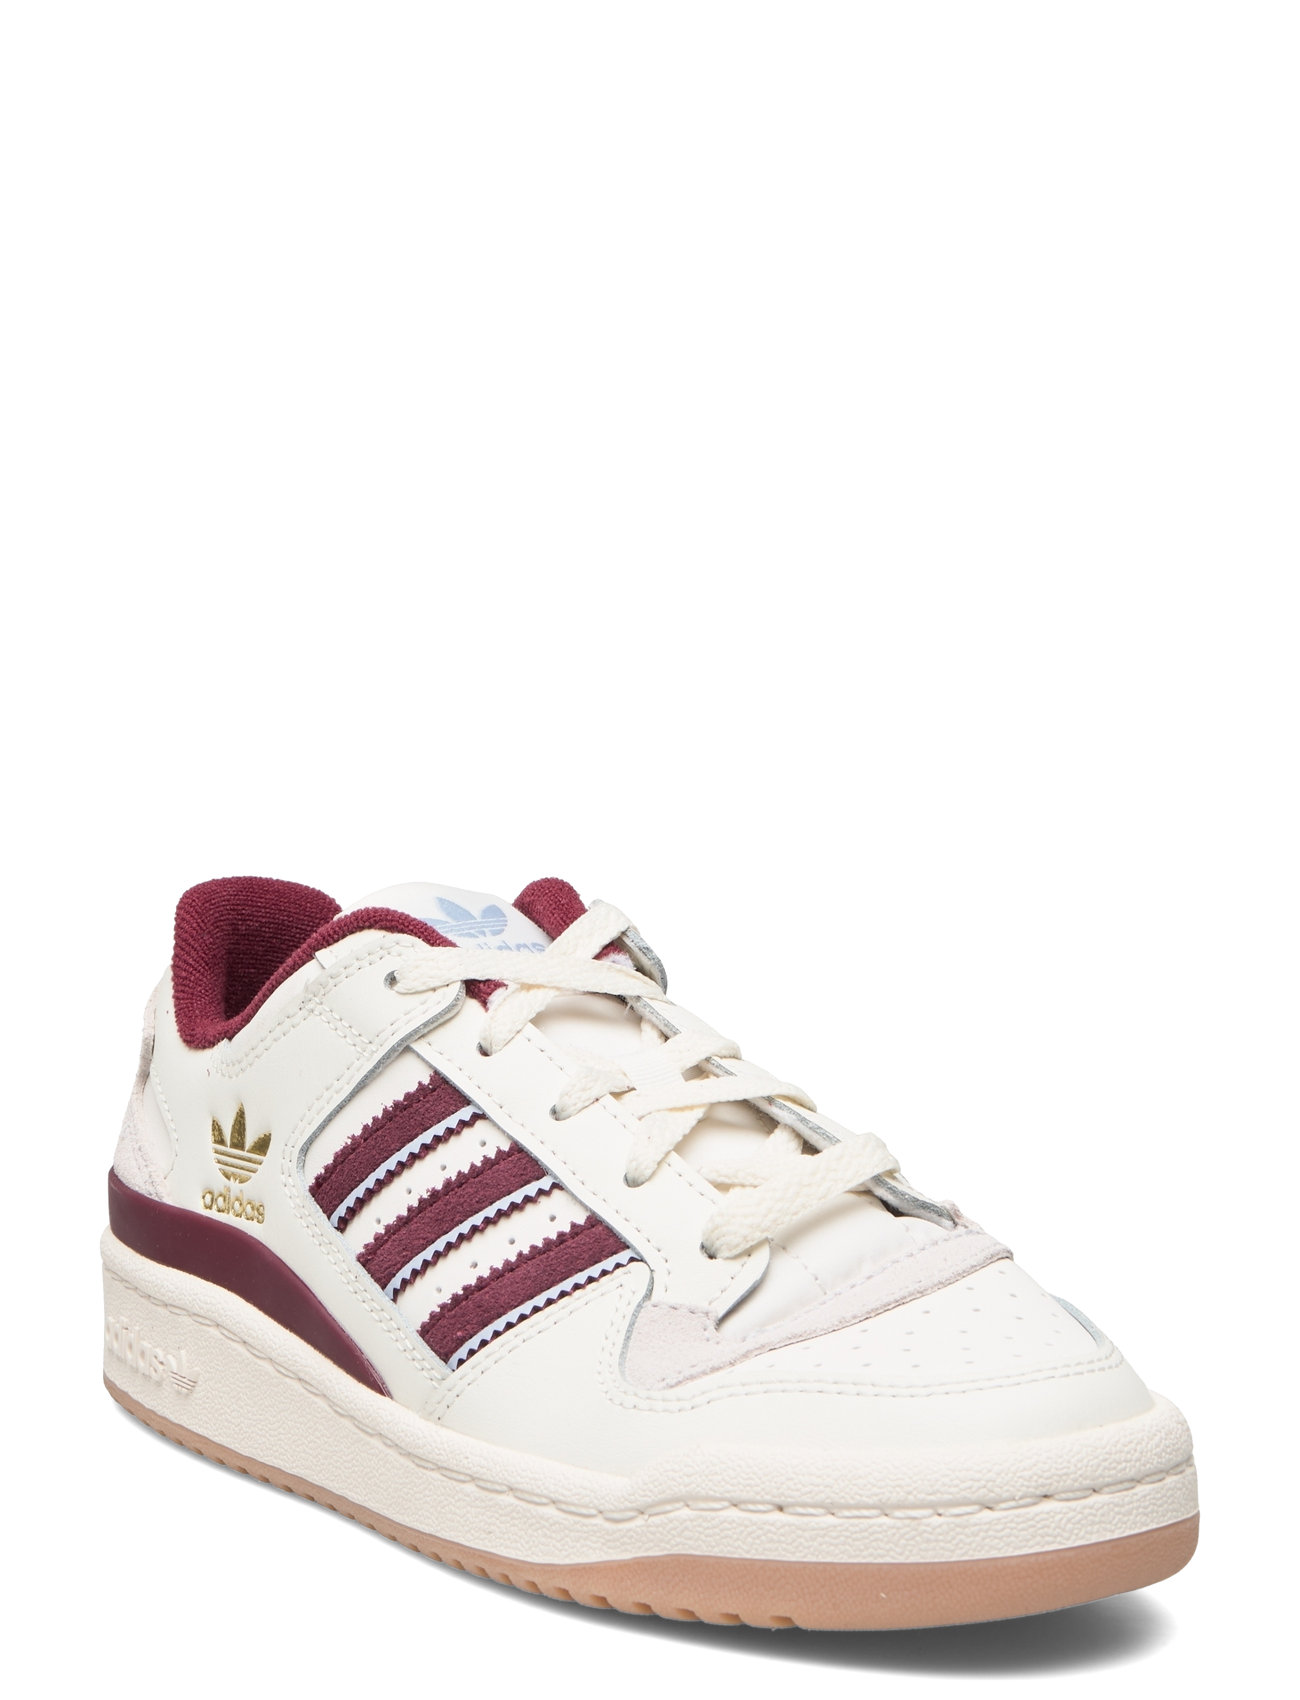 adidas Forum Low CL Shoes - White, Women's Basketball